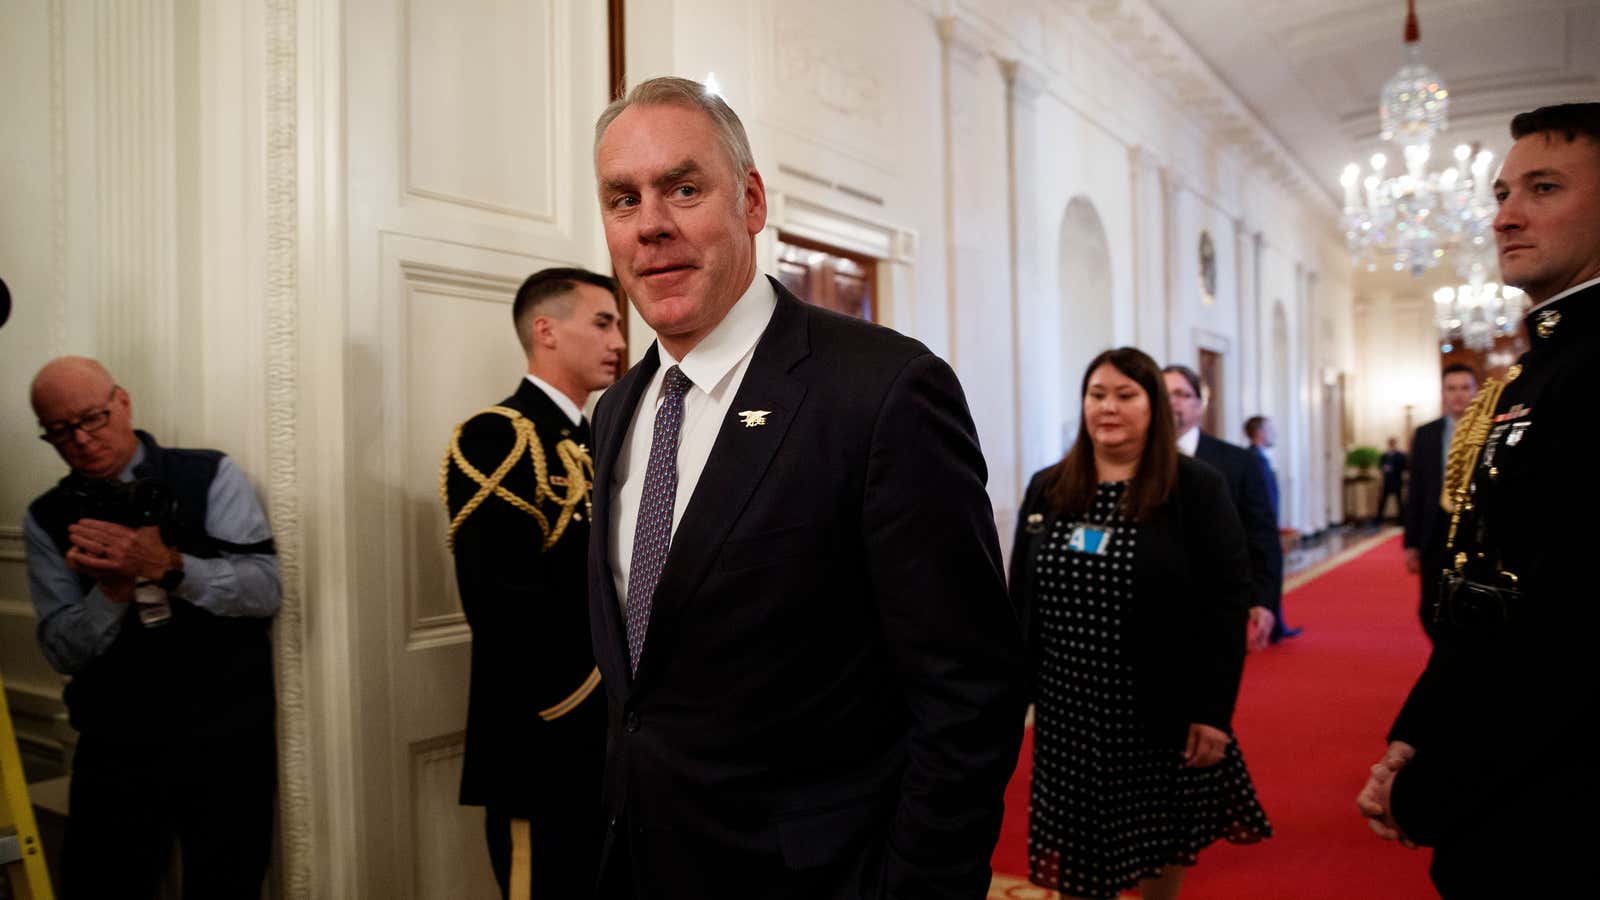 Zinke has been the subject of at least 15 investigations since taking office in 2017.